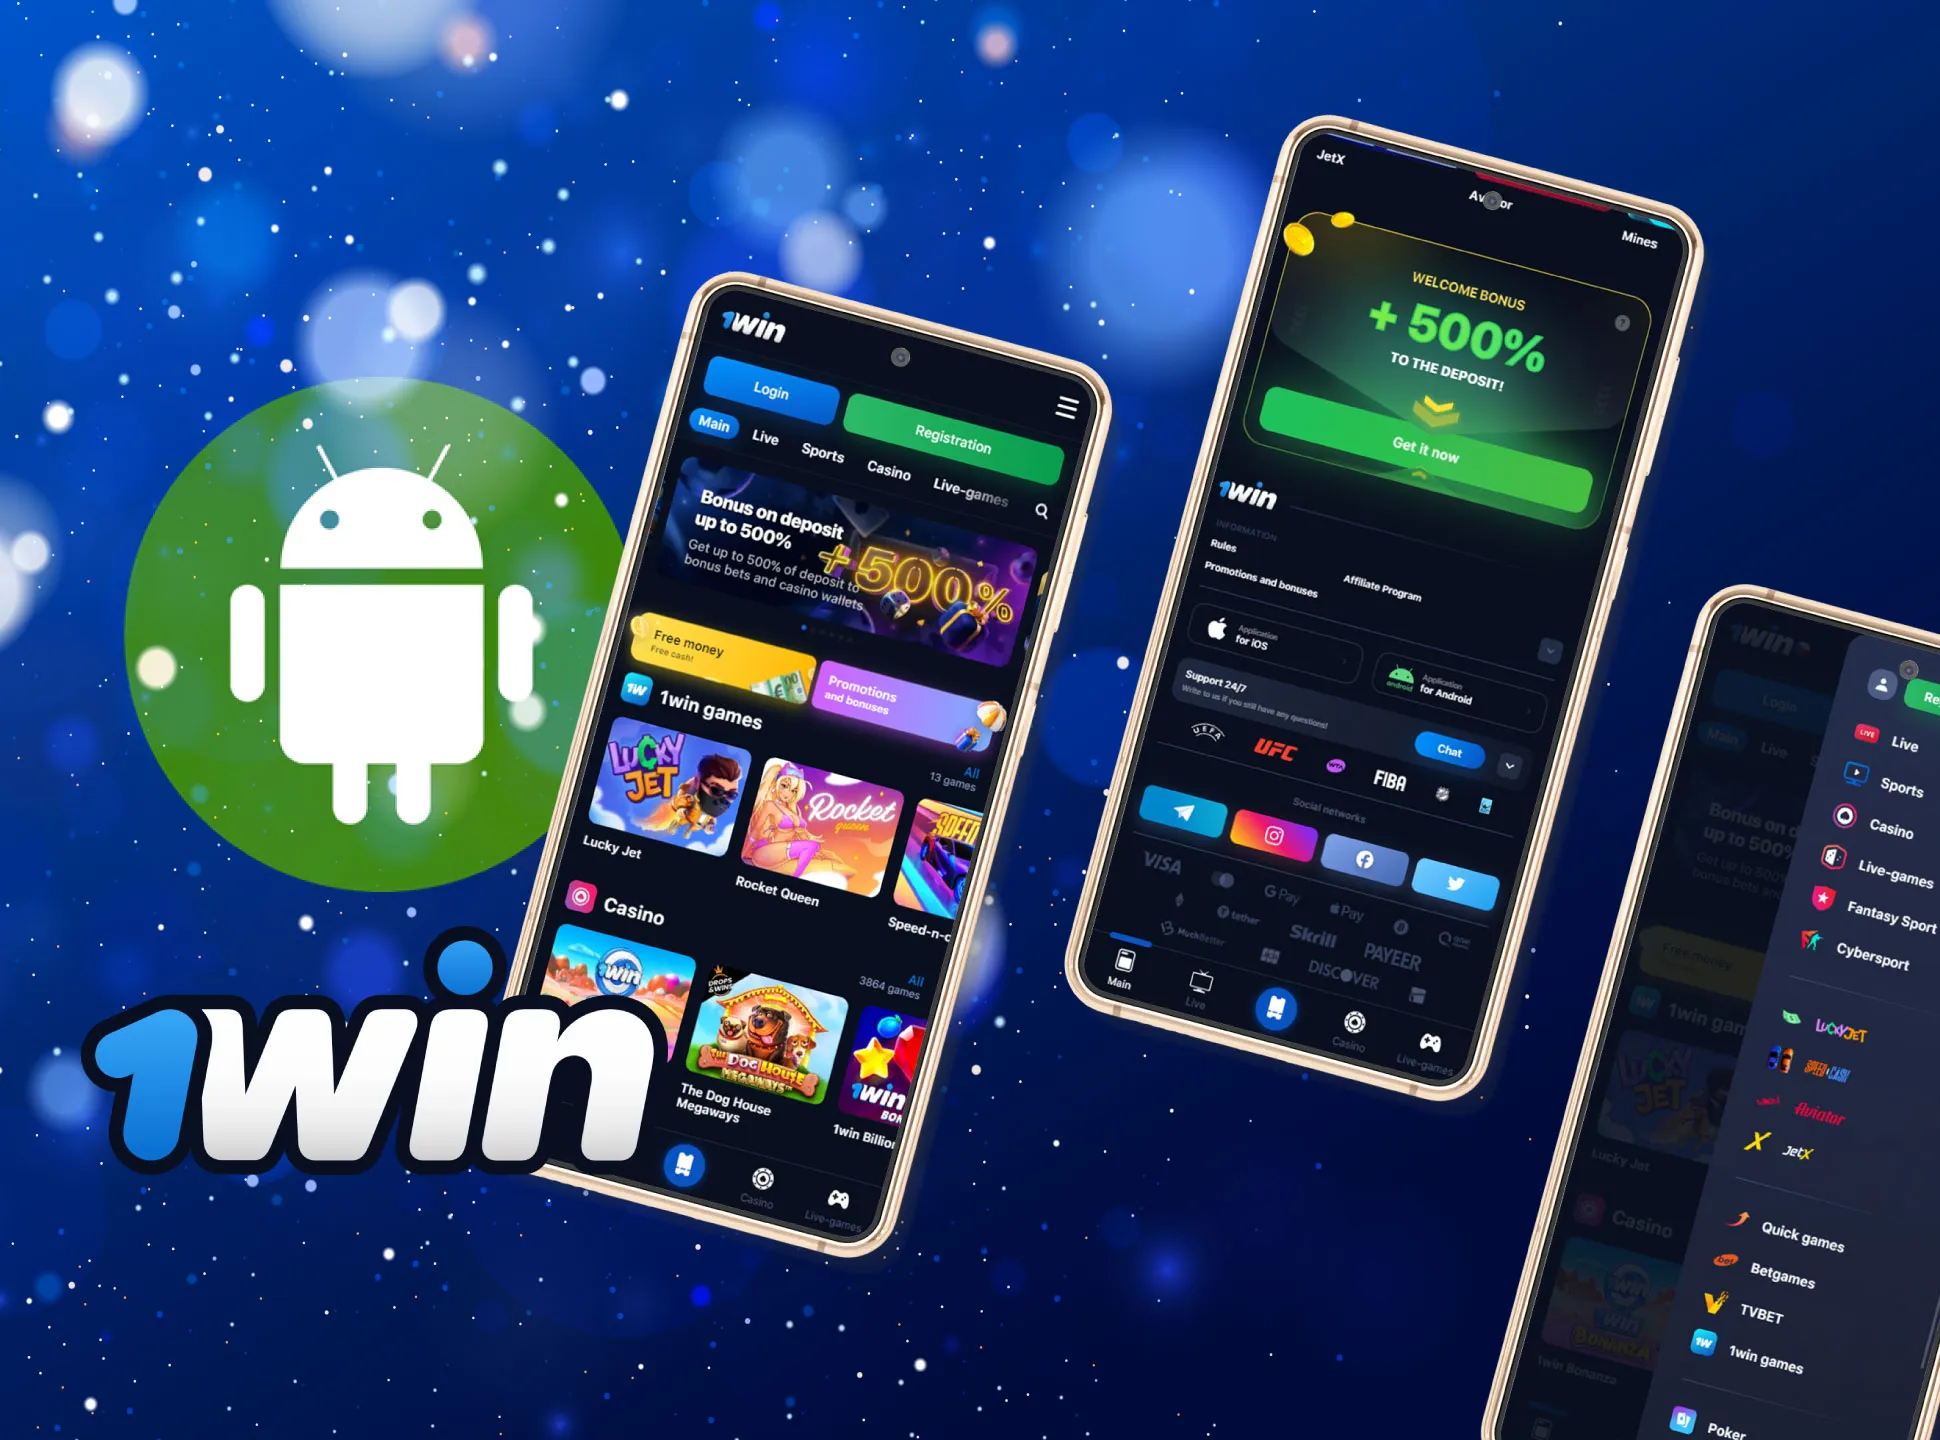 Download the Android version of the 1win app.